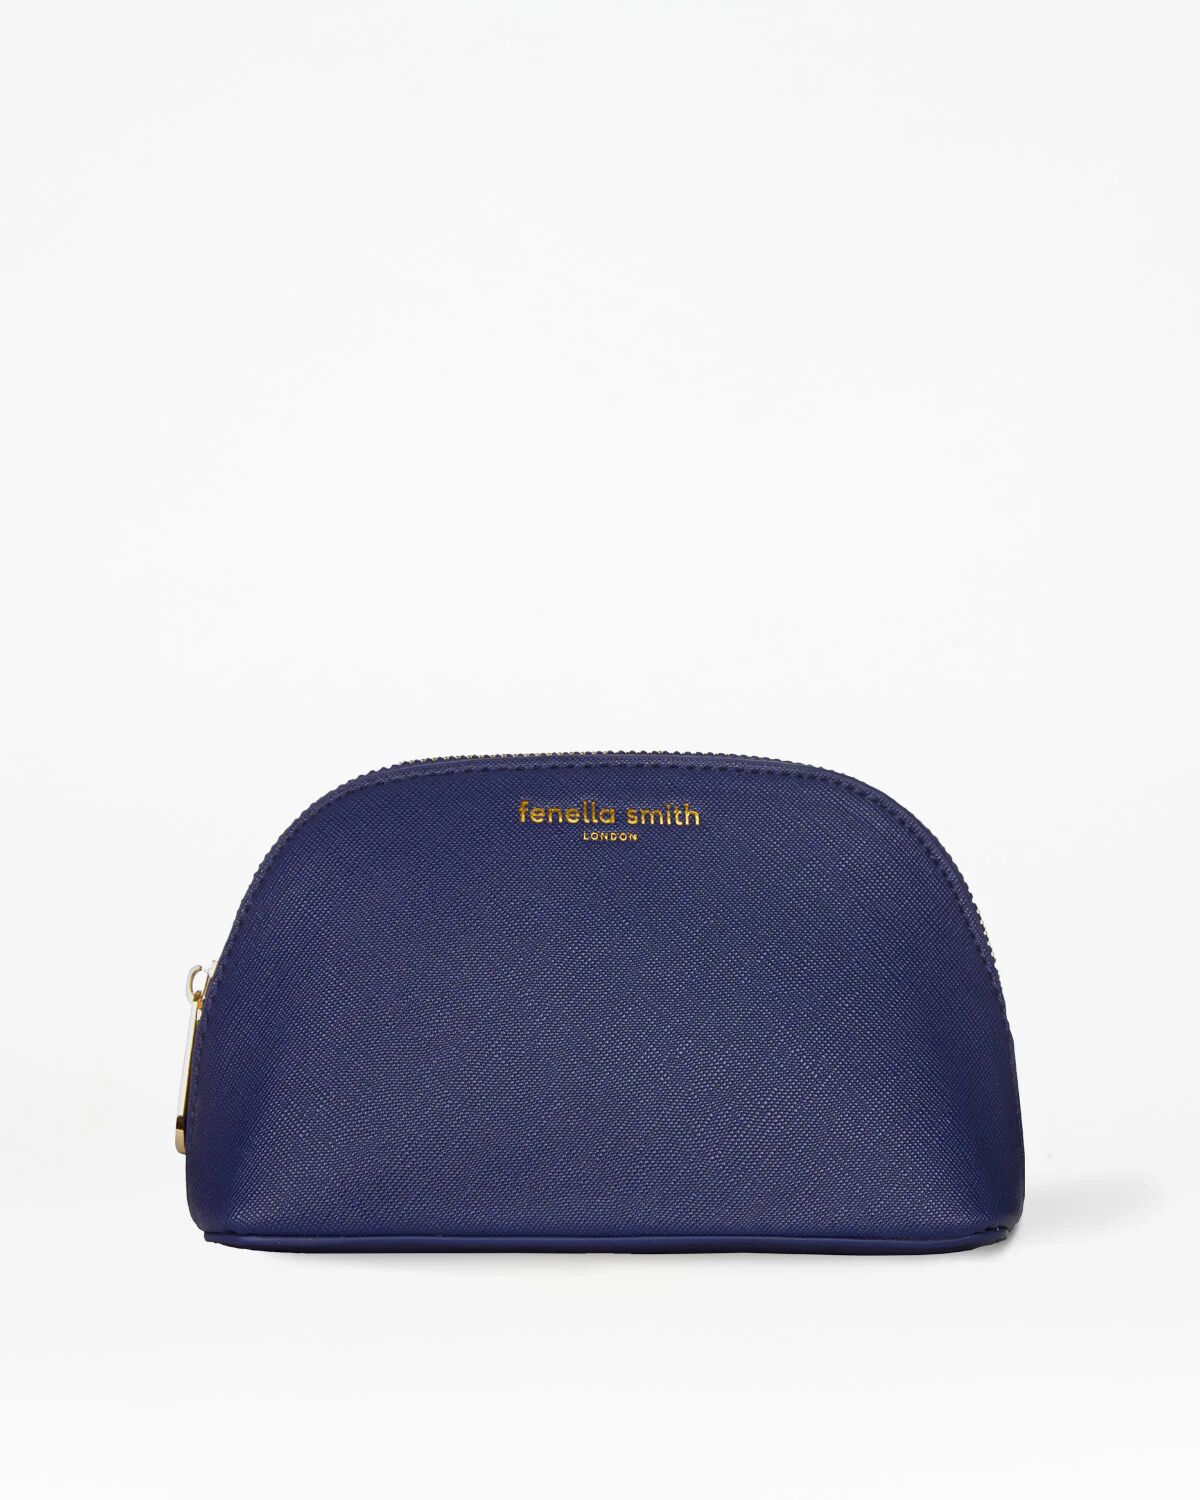 Fenella Smith Navy Oyster Cosmetic Case Unisex